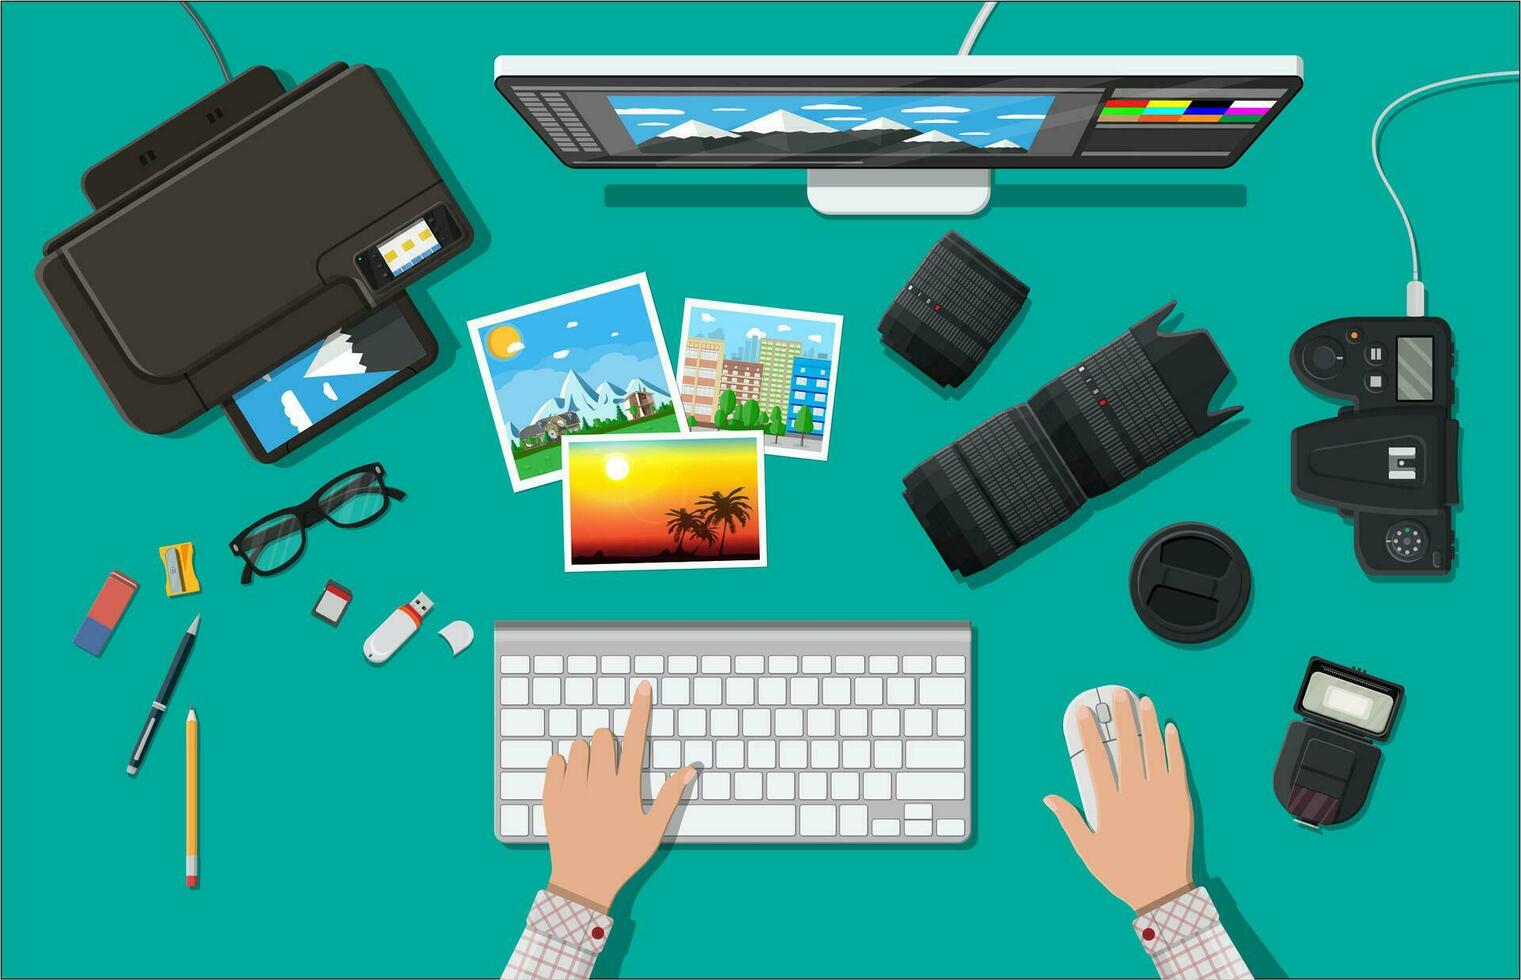 Workspace of photographer. Desktop pc, printer. Modern photo camera, flash, lens and memory card. Professional device for photography. Digital photos and printing. Vector illustration in flat style